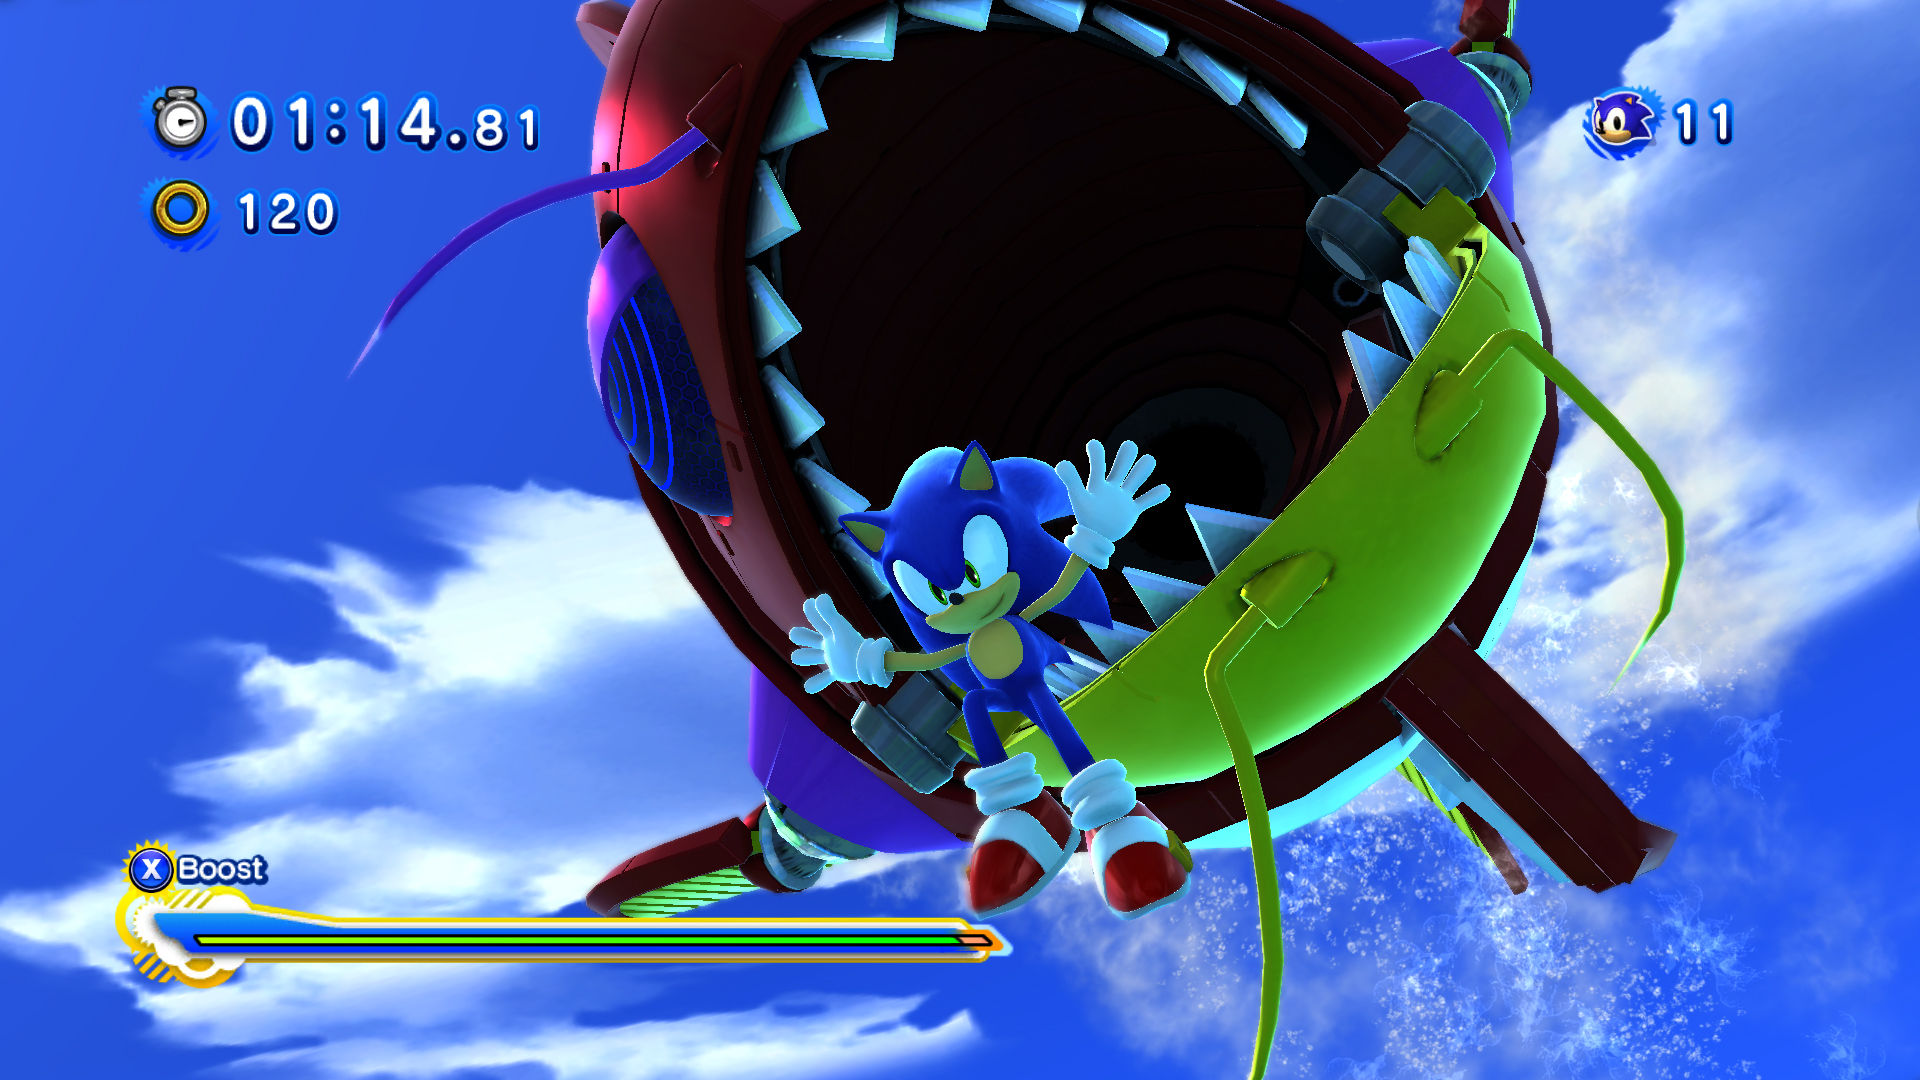 sonic generations for free